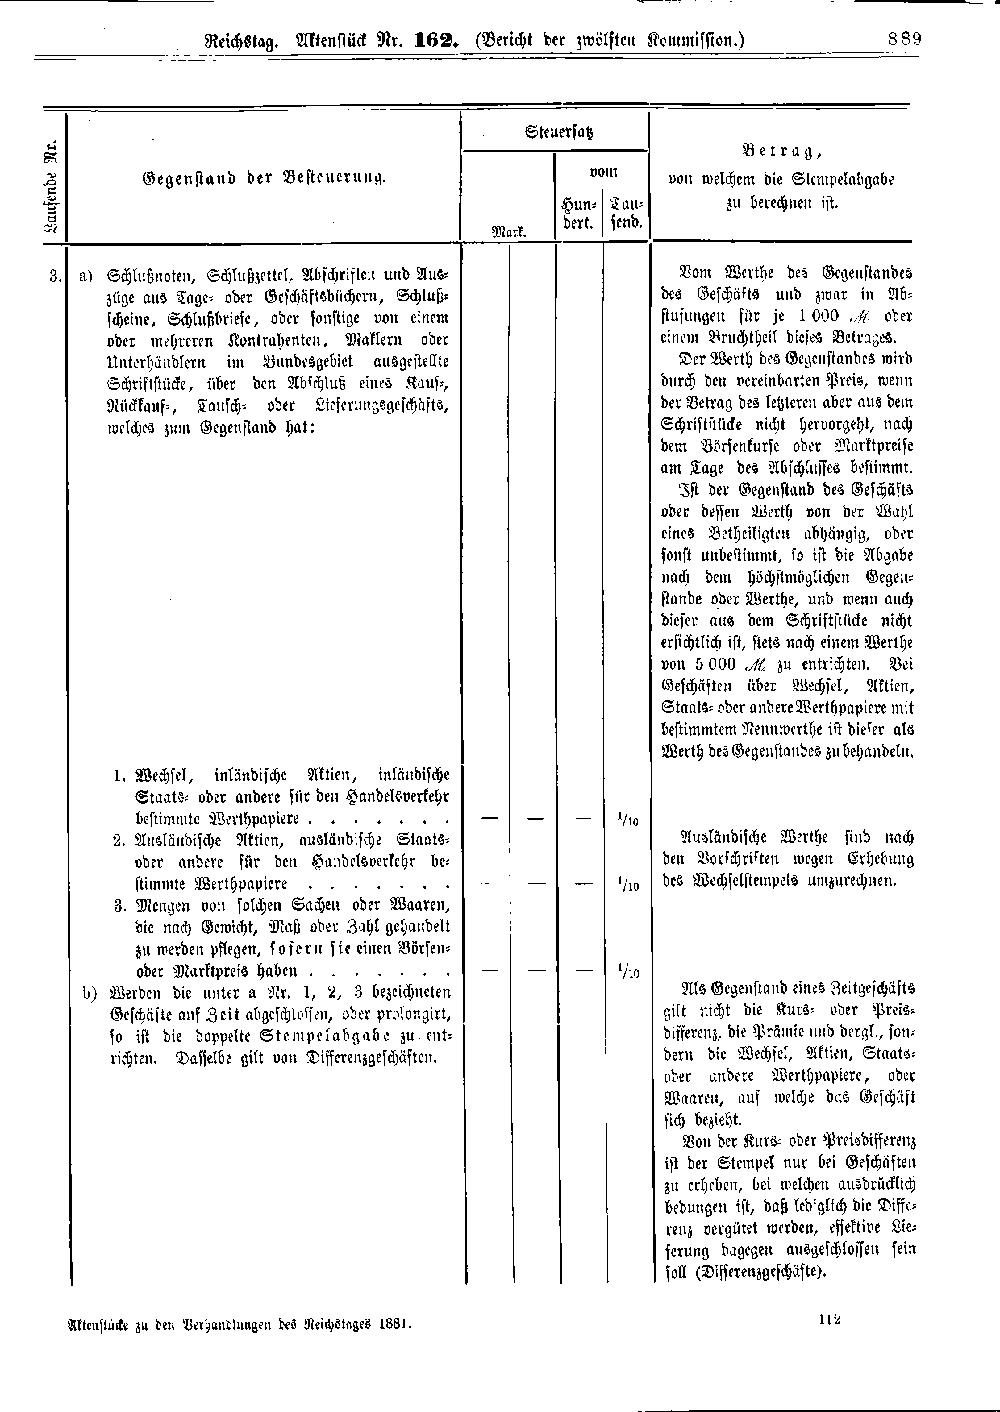 Scan of page 889